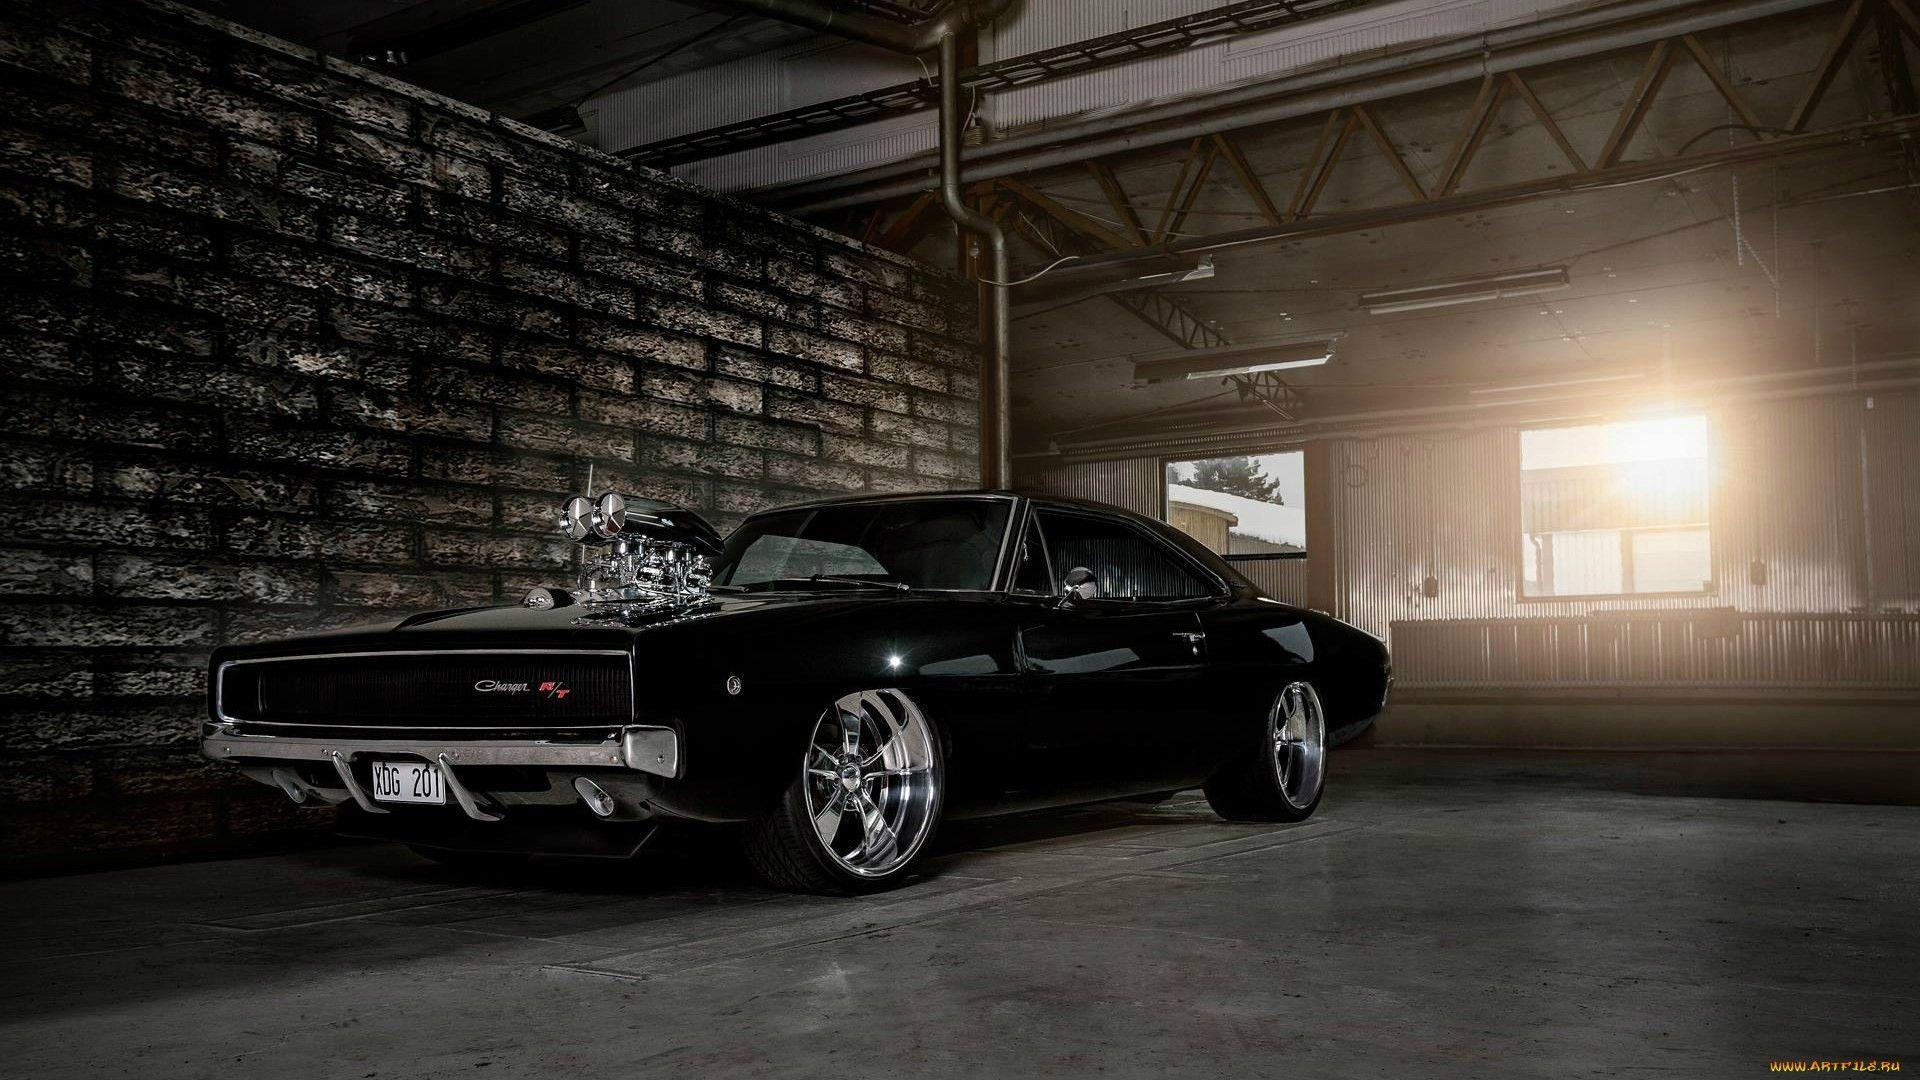 1970 Dodge Charger Wallpapers   Top Free 1970 Dodge Charger